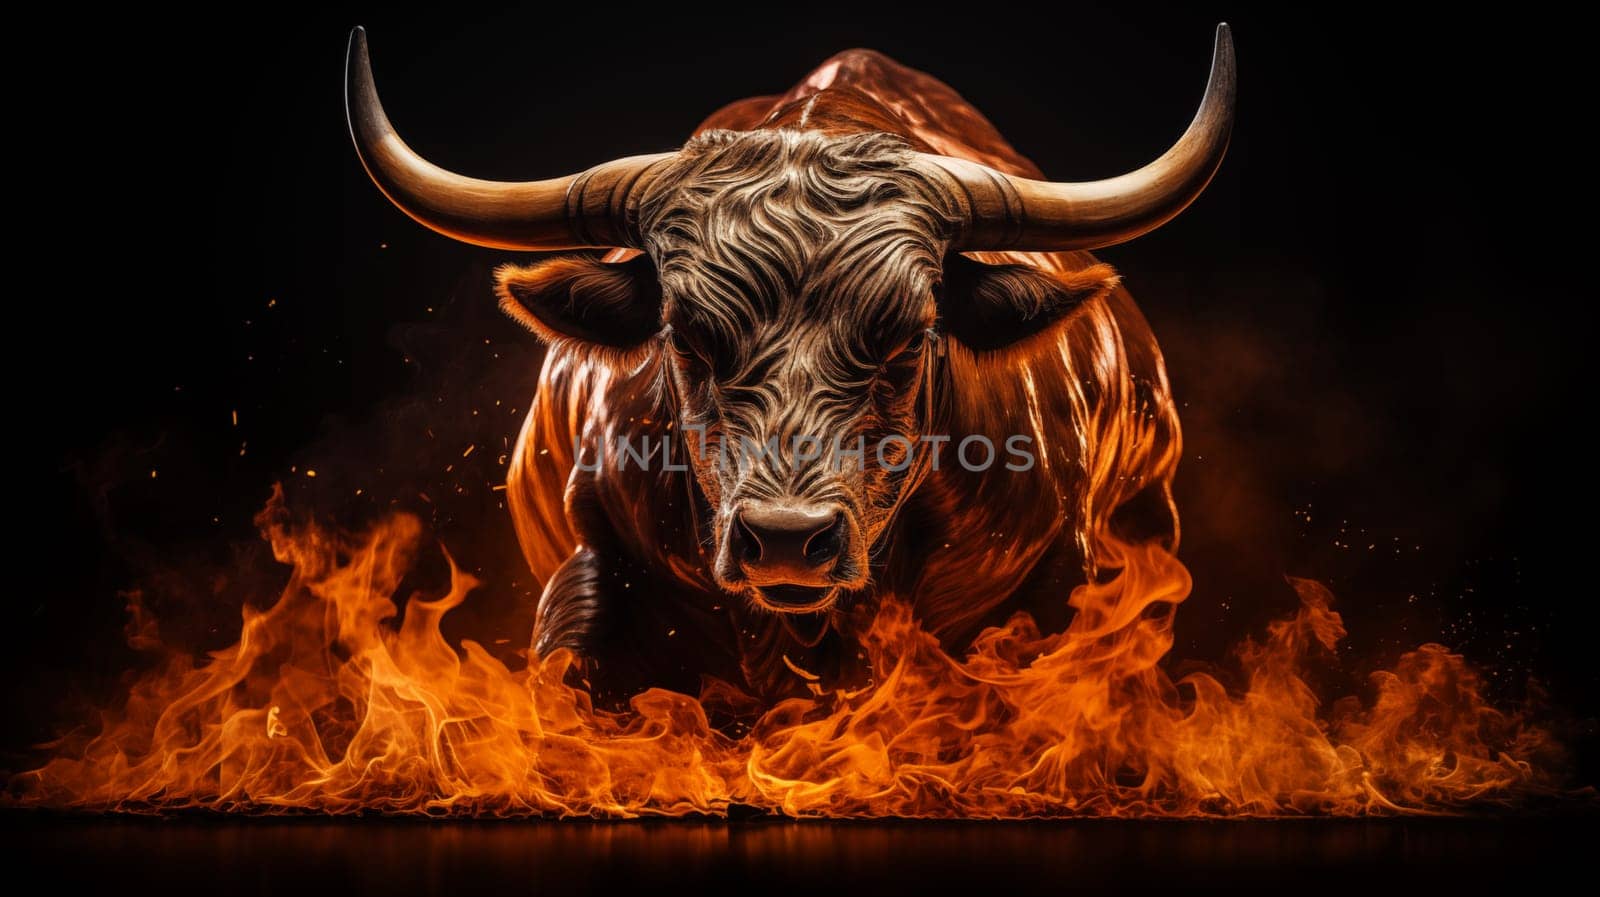 Front view of Big black burning bull galloping on fire, on a black background.